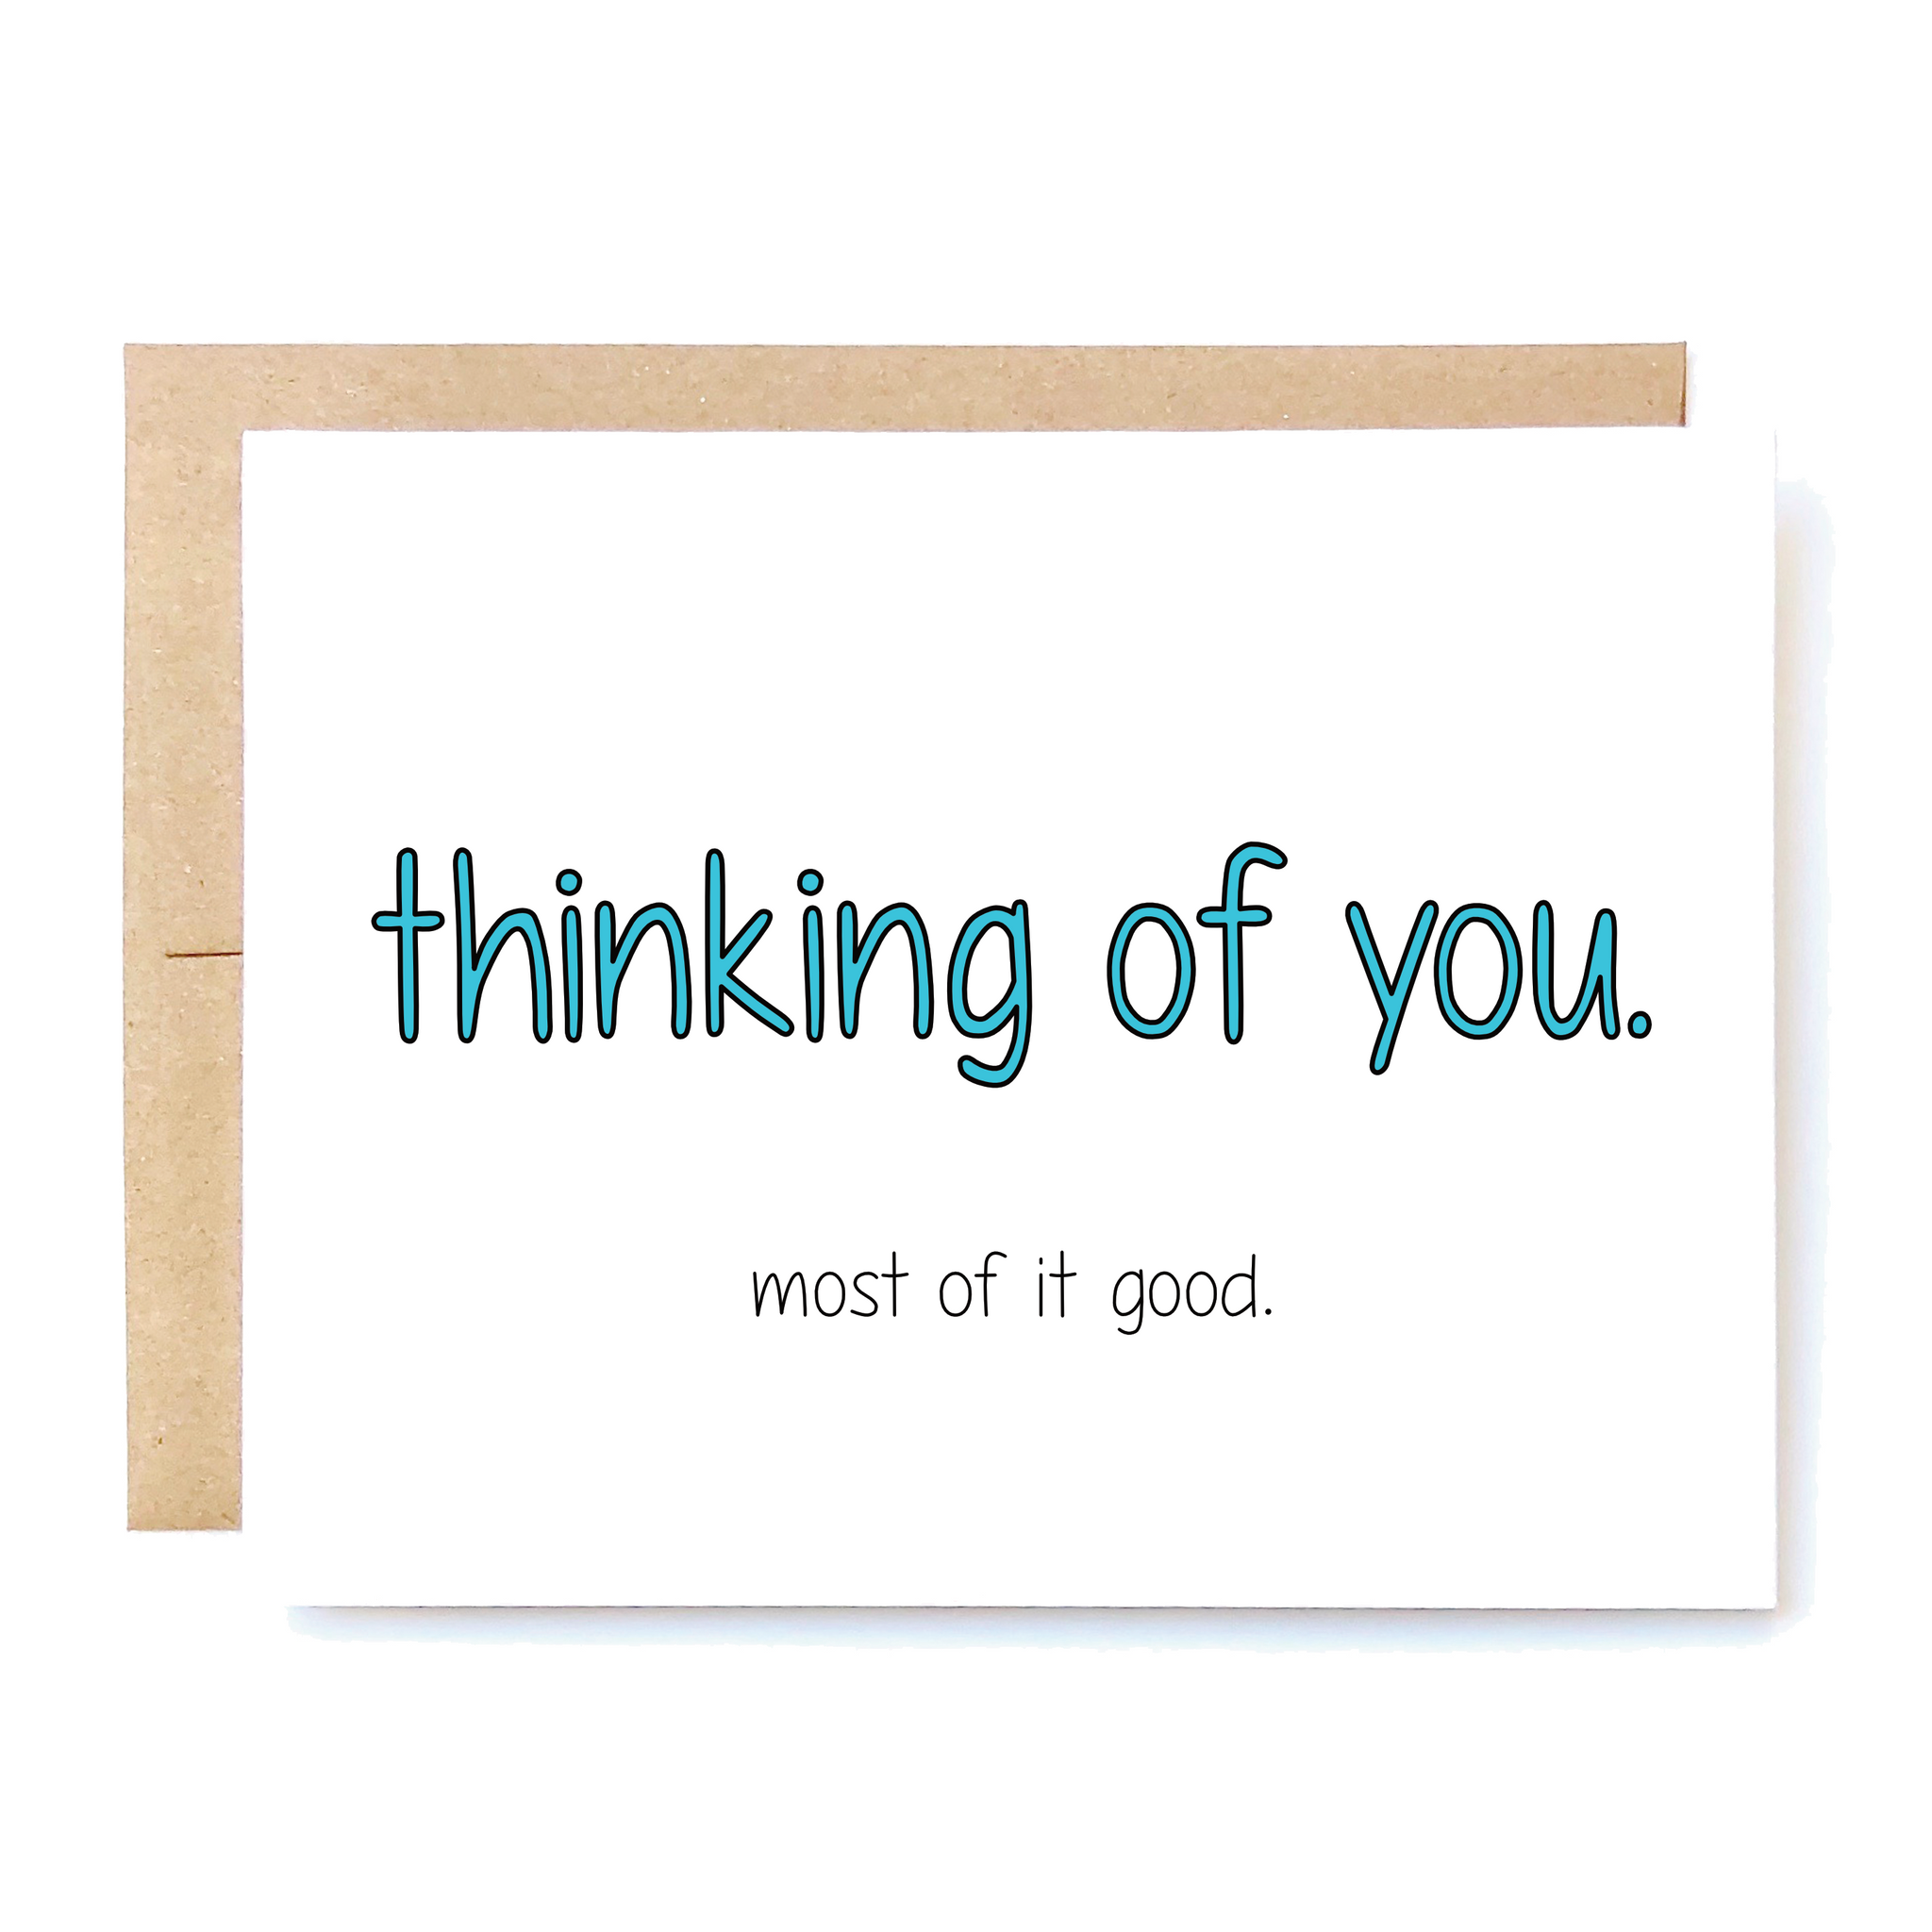 Card Front: Thinking of you. Most of it good.